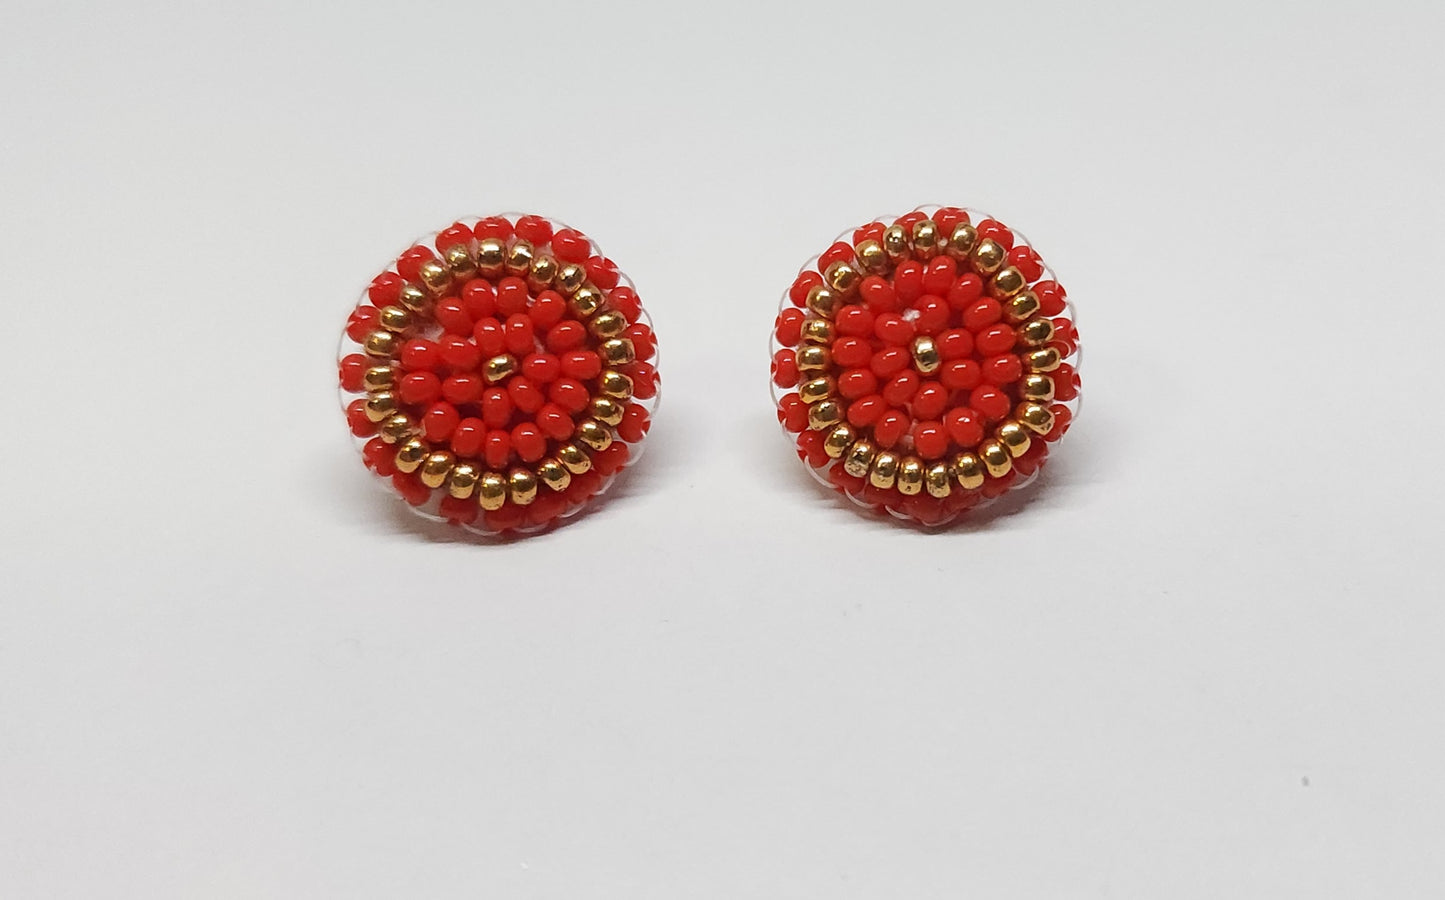 Red & Gold Love Studs with nickel-free posts